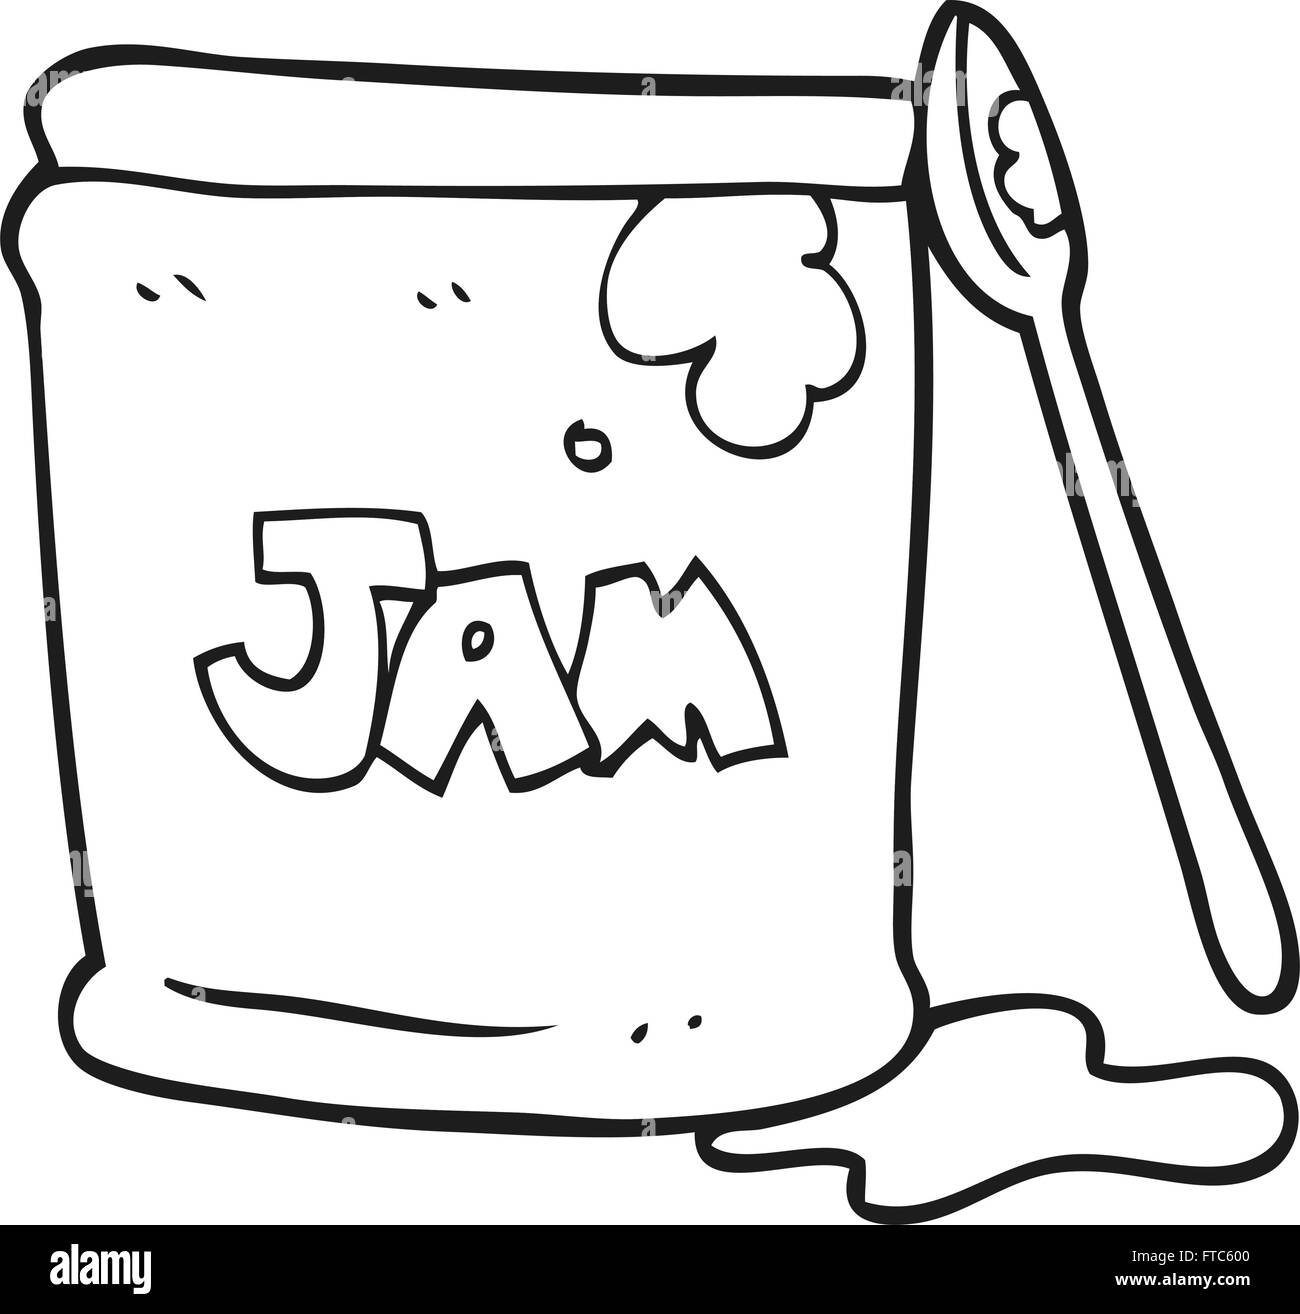 jelly clip art black and white